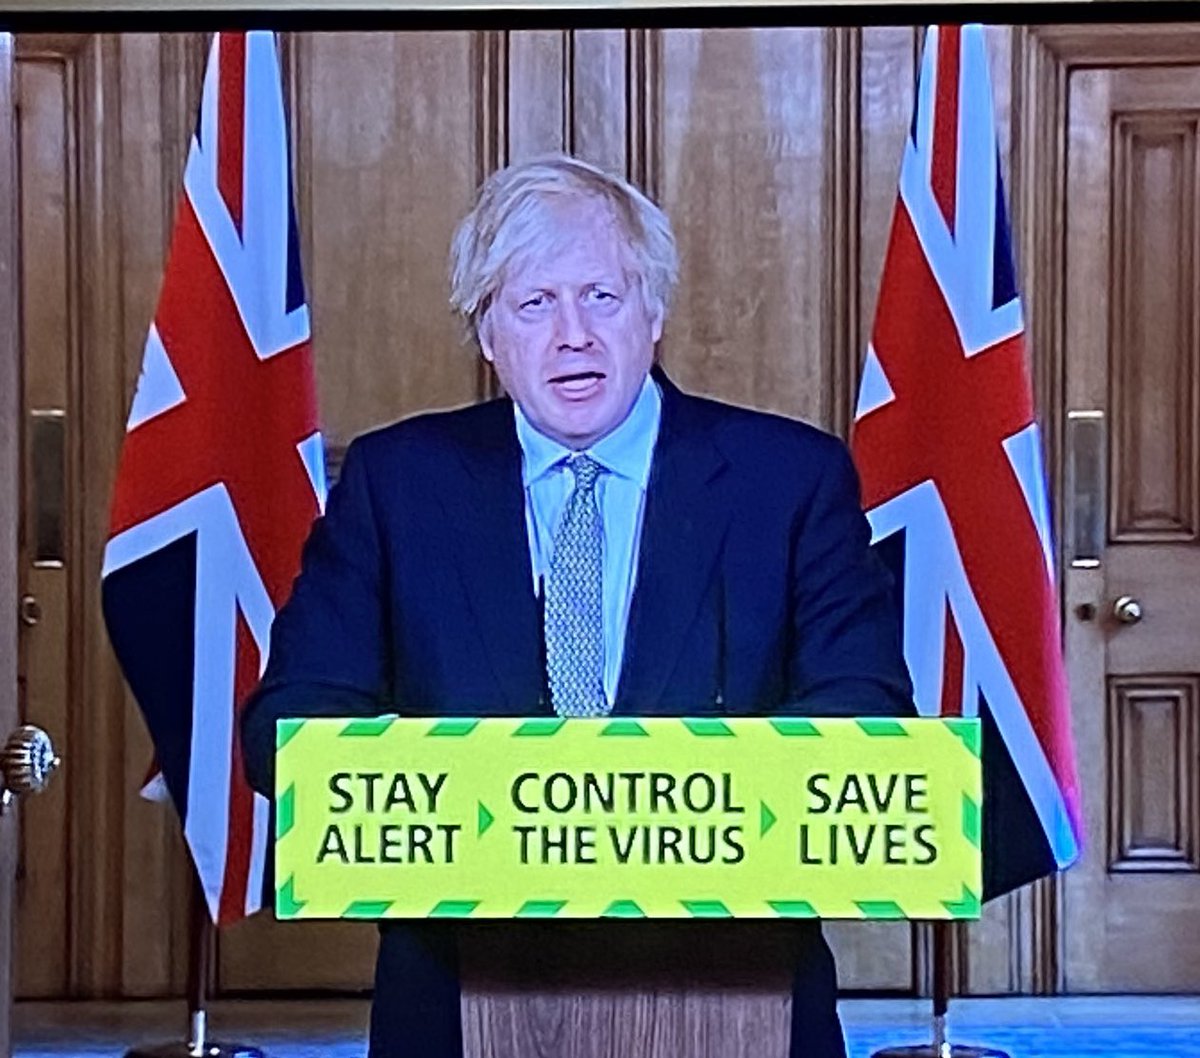 Boris Johnson is done. 
63k people dead on his watch from a virus his reckless complacency & negligence failed to contain. 
Now he tells the British public their lengthy lockdown effort was all a waste of time, just to save his lying hypocrite aide.
From hero to zero in 6 months.